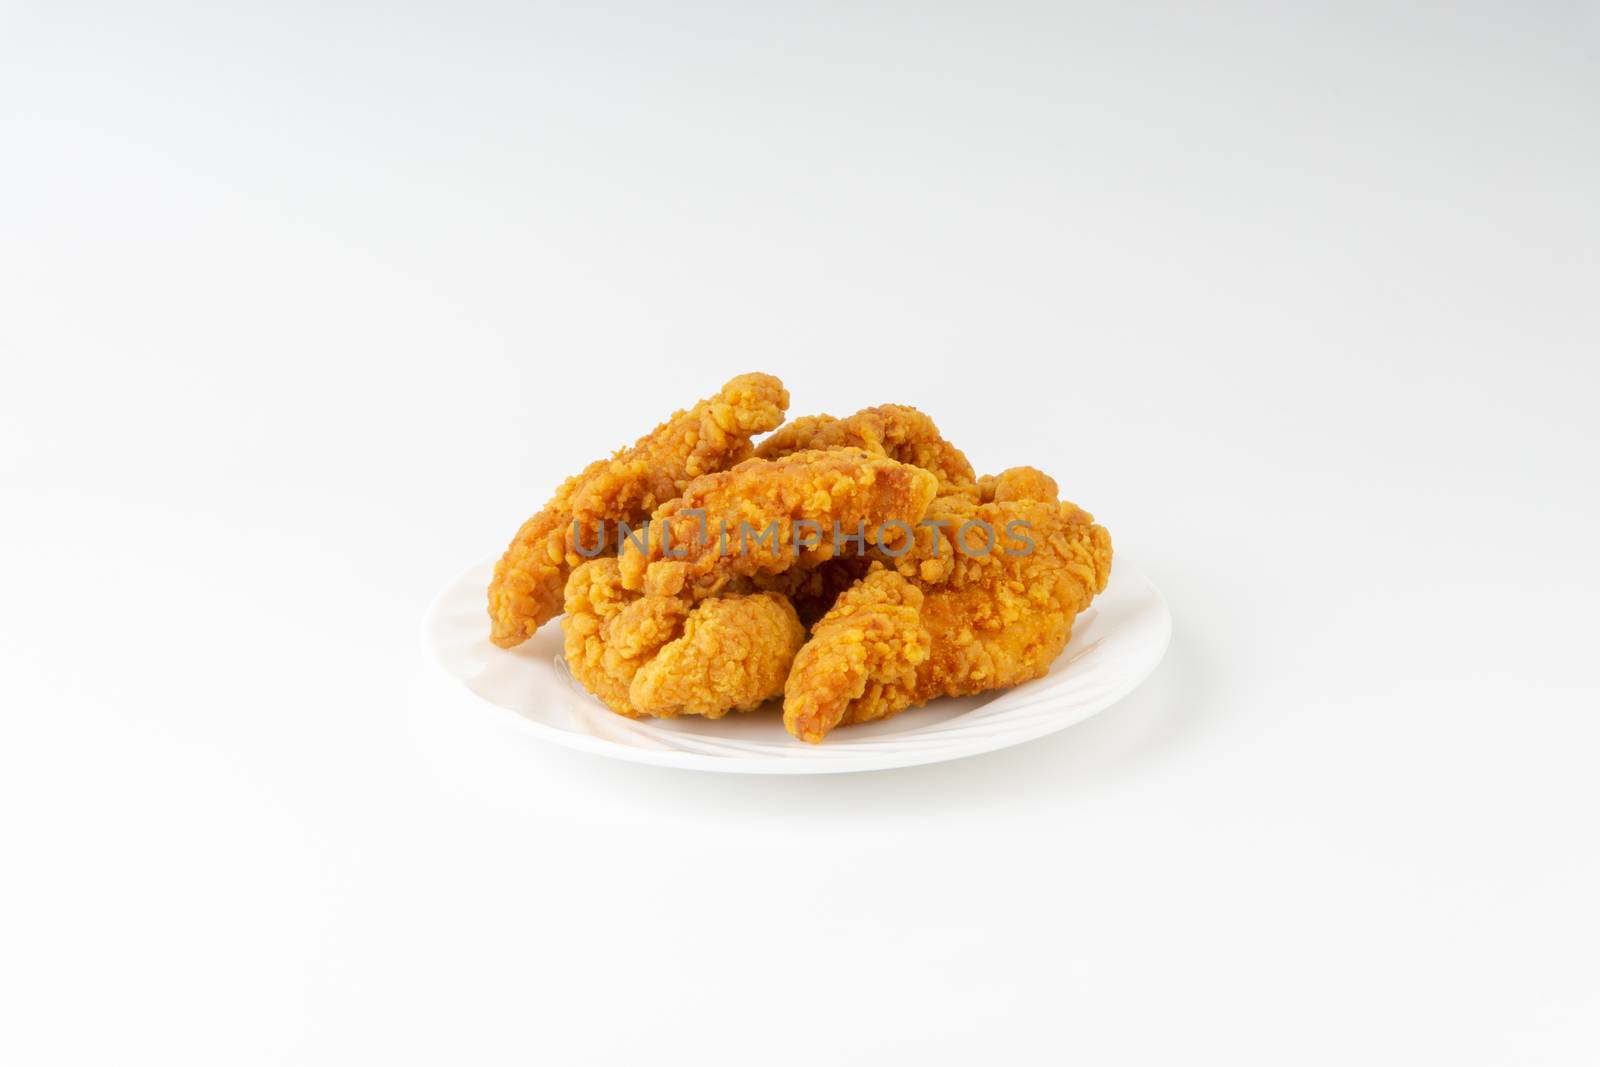 Fried breaded chicken fillet isolated on white background  by silverwings